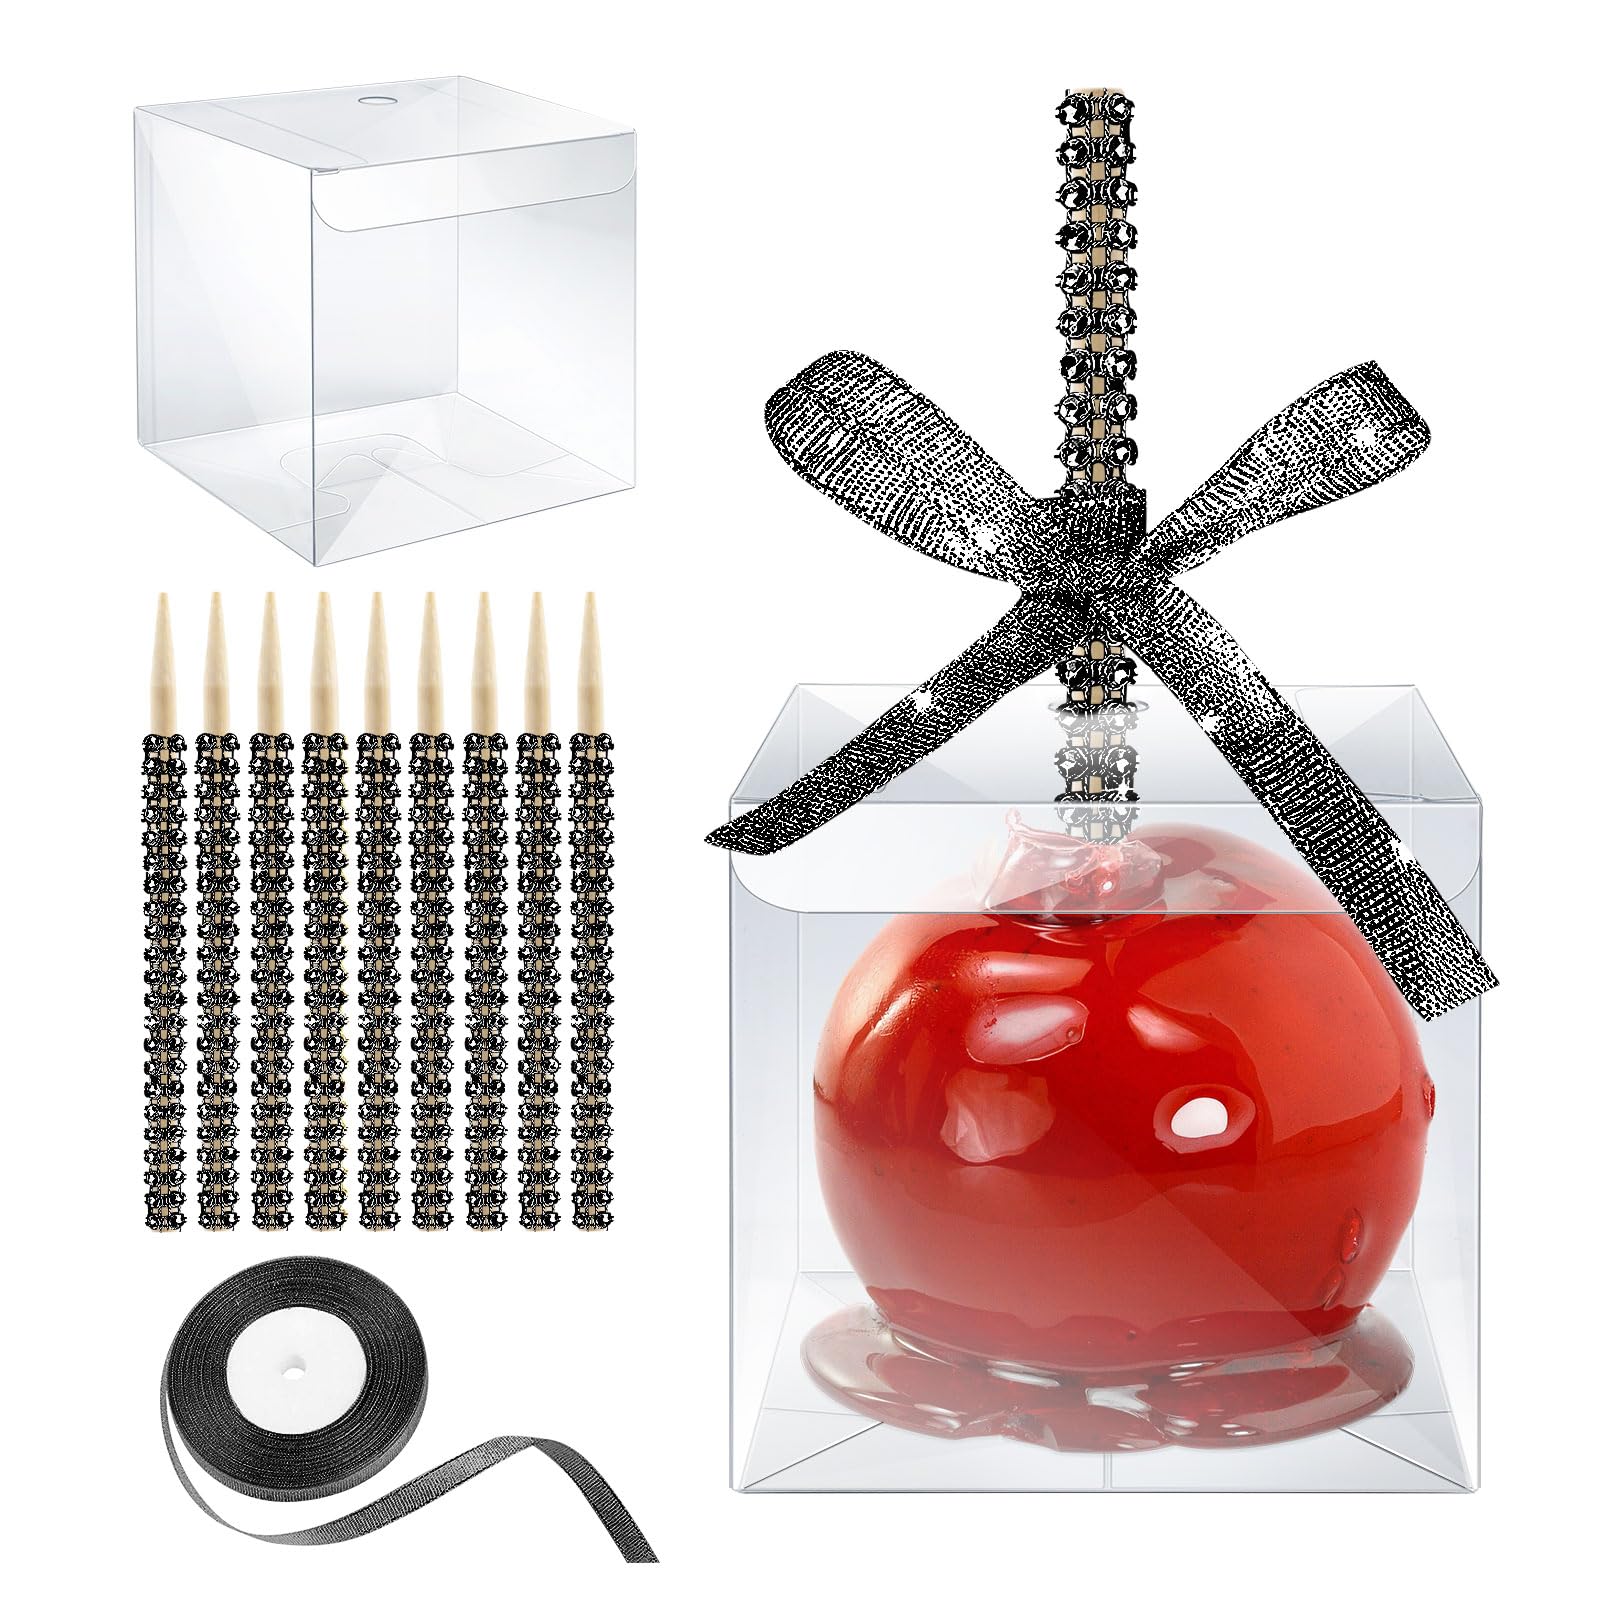 MGWOTH Candy Apple Boxes with Bling Stick Hole Set,20 Pack Caramel Apple Wrapping Kit with Clear Containers & Rhinestone Bamboo Skewers & Glitter Ribbons,Top for Cake Pop Chocolate Treat Christmas